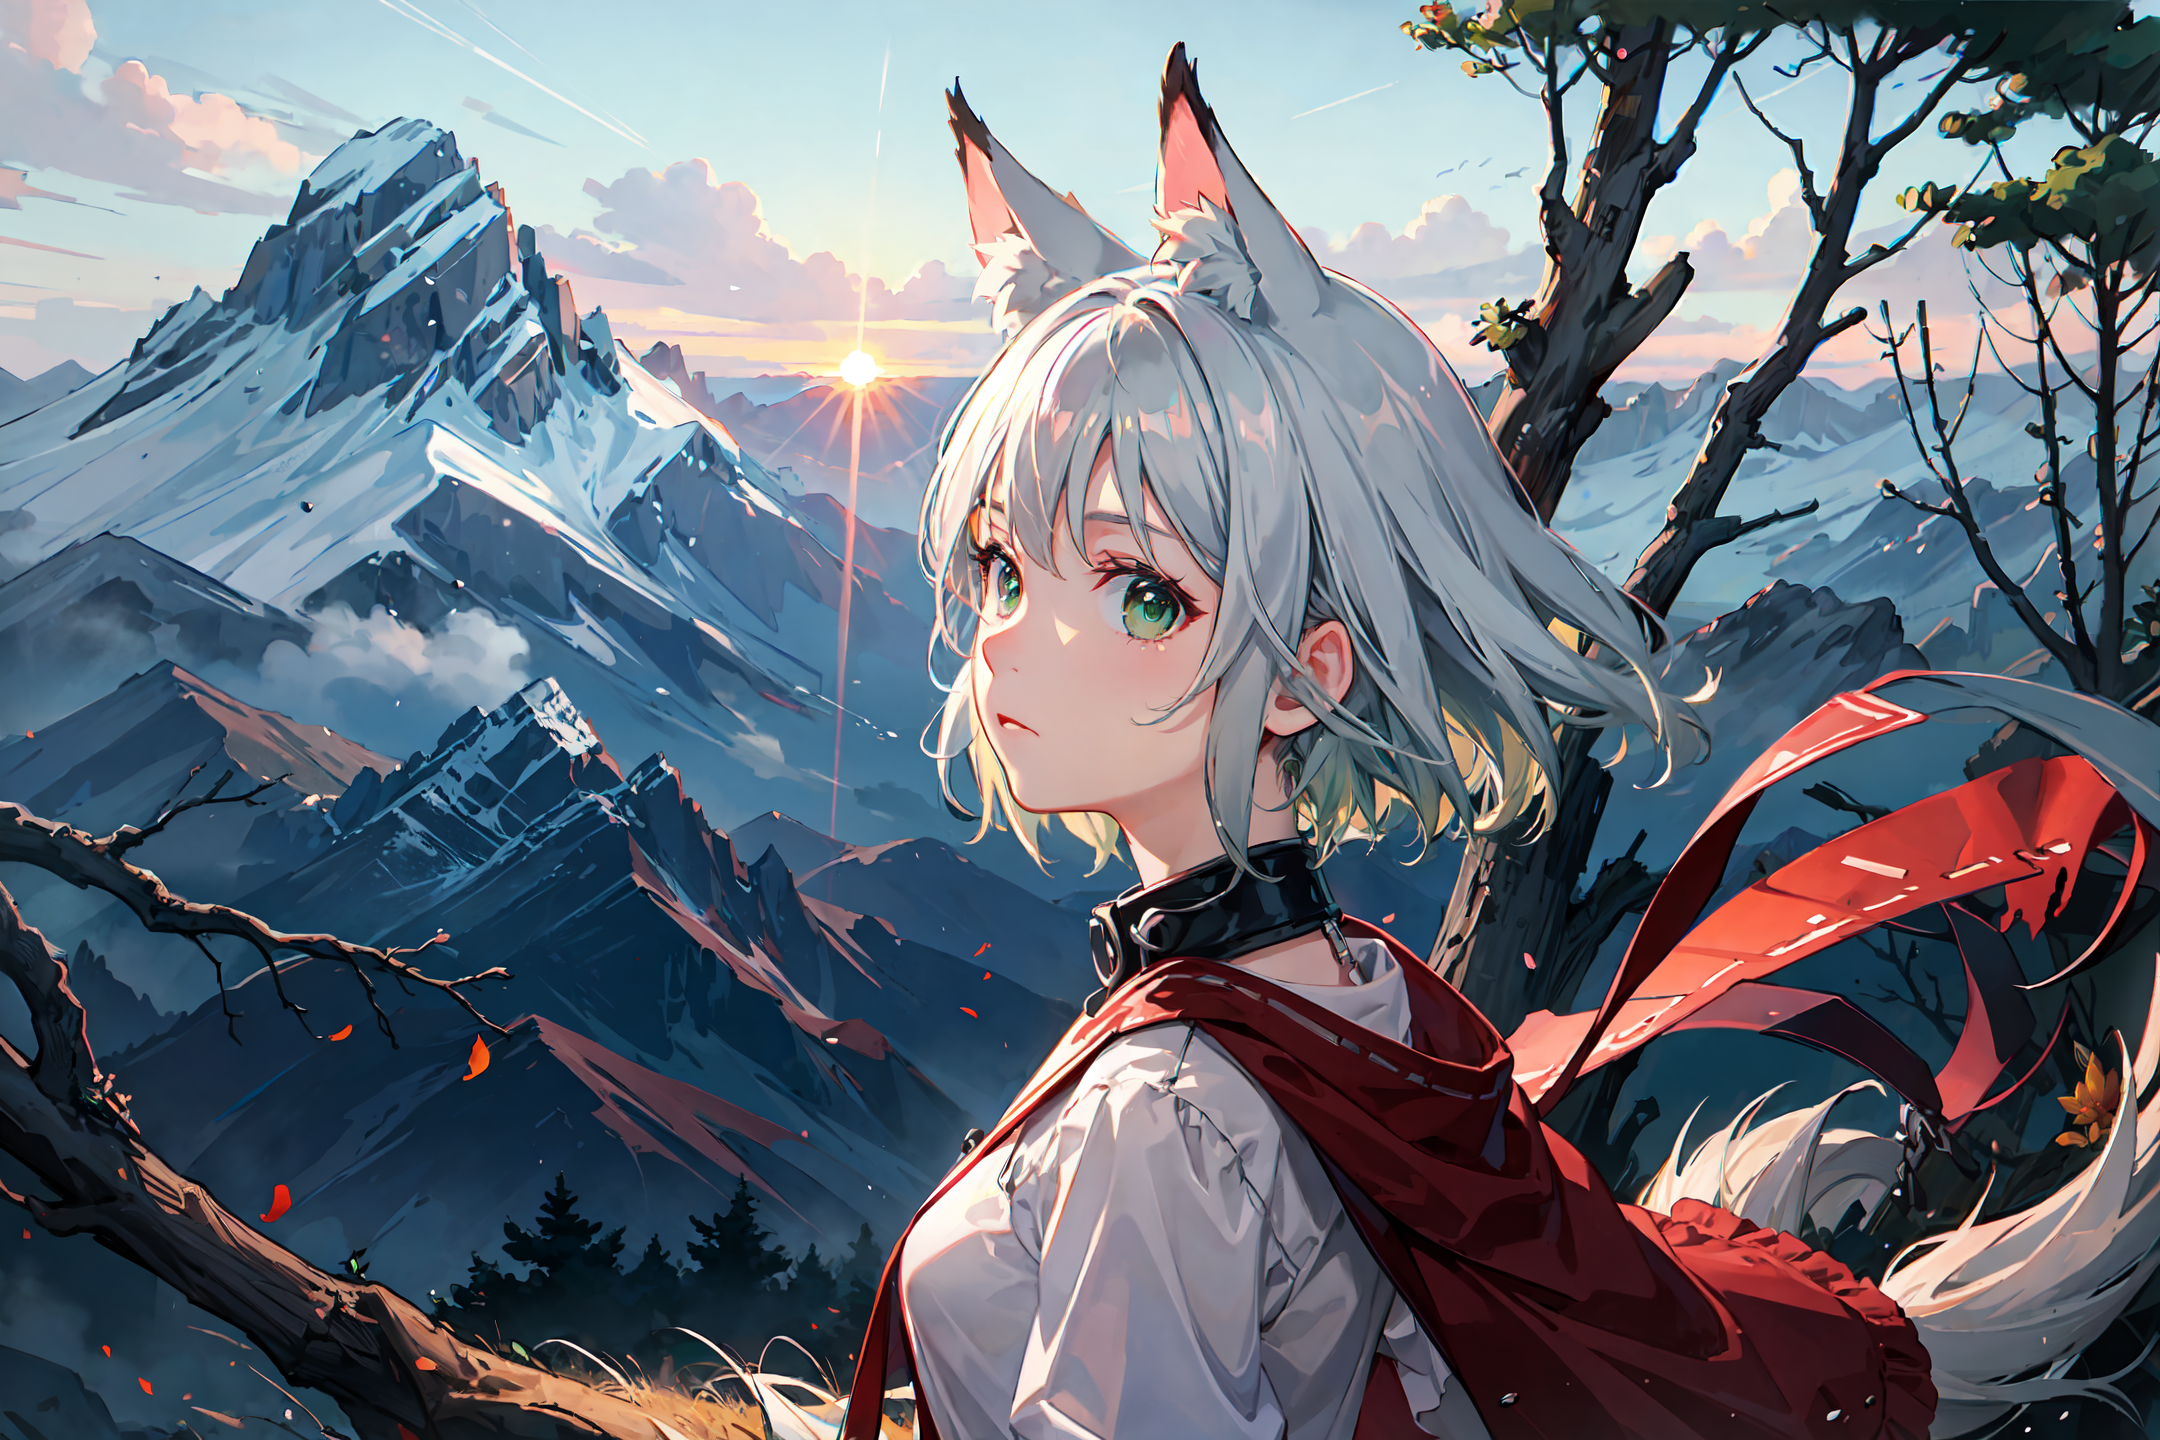 A girl with cat ears and a tail, standing in a mountainous area.